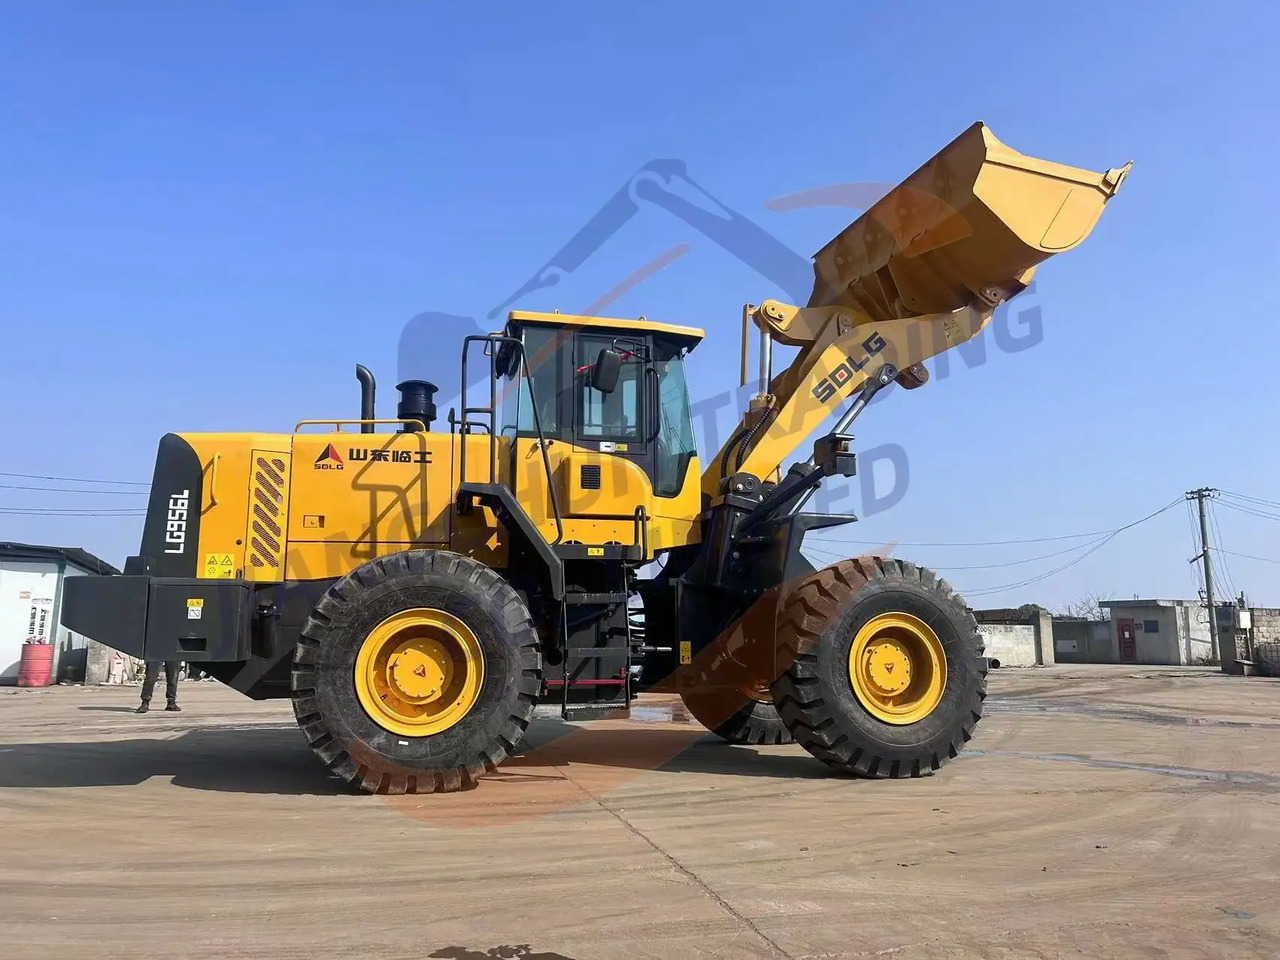 Колесен товарач competitive Used wheel loader SDLG 956L L956F 956l wheel loader China heavy duty hydraulic tractor loader in low price: снимка 7